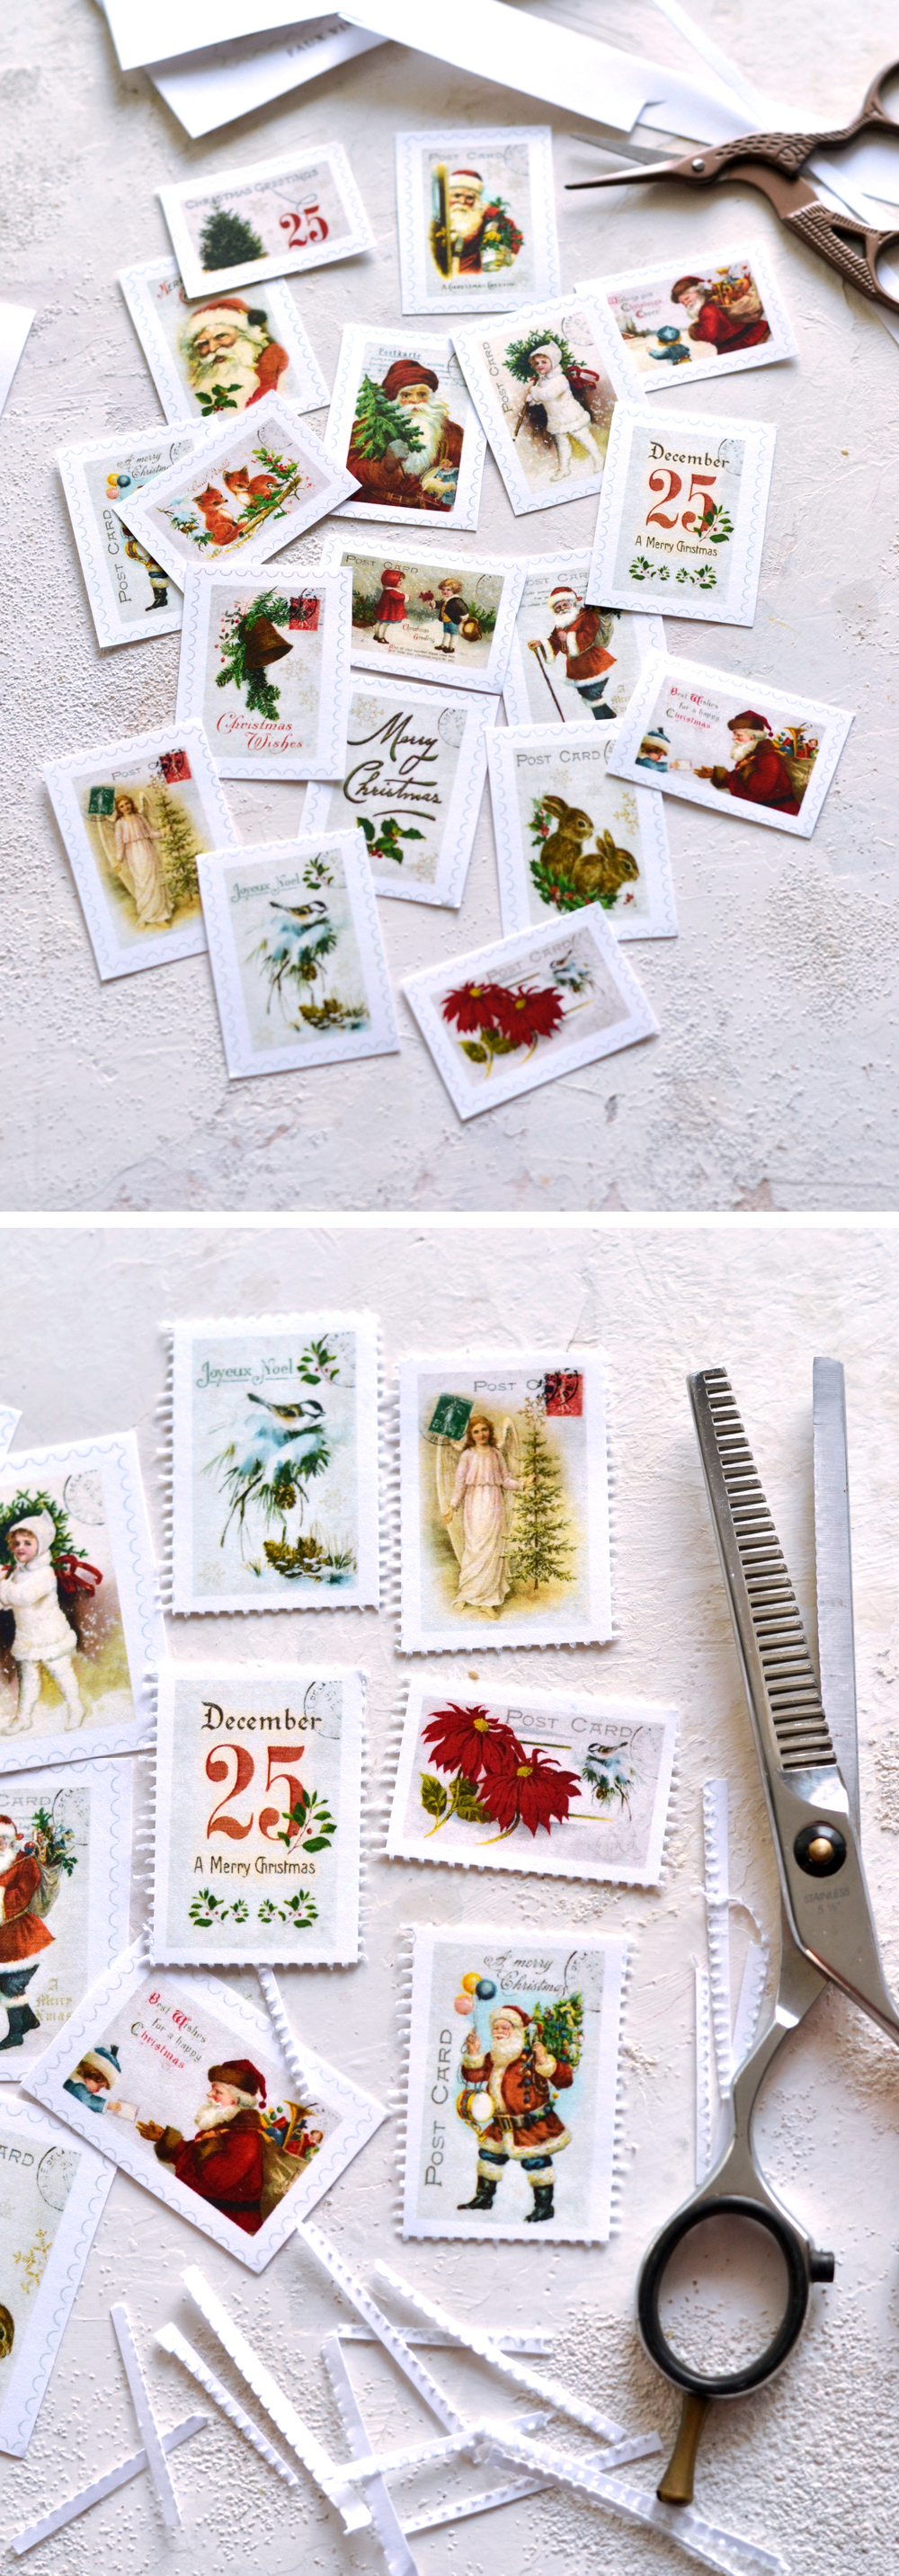 Stamps cut out with scissors